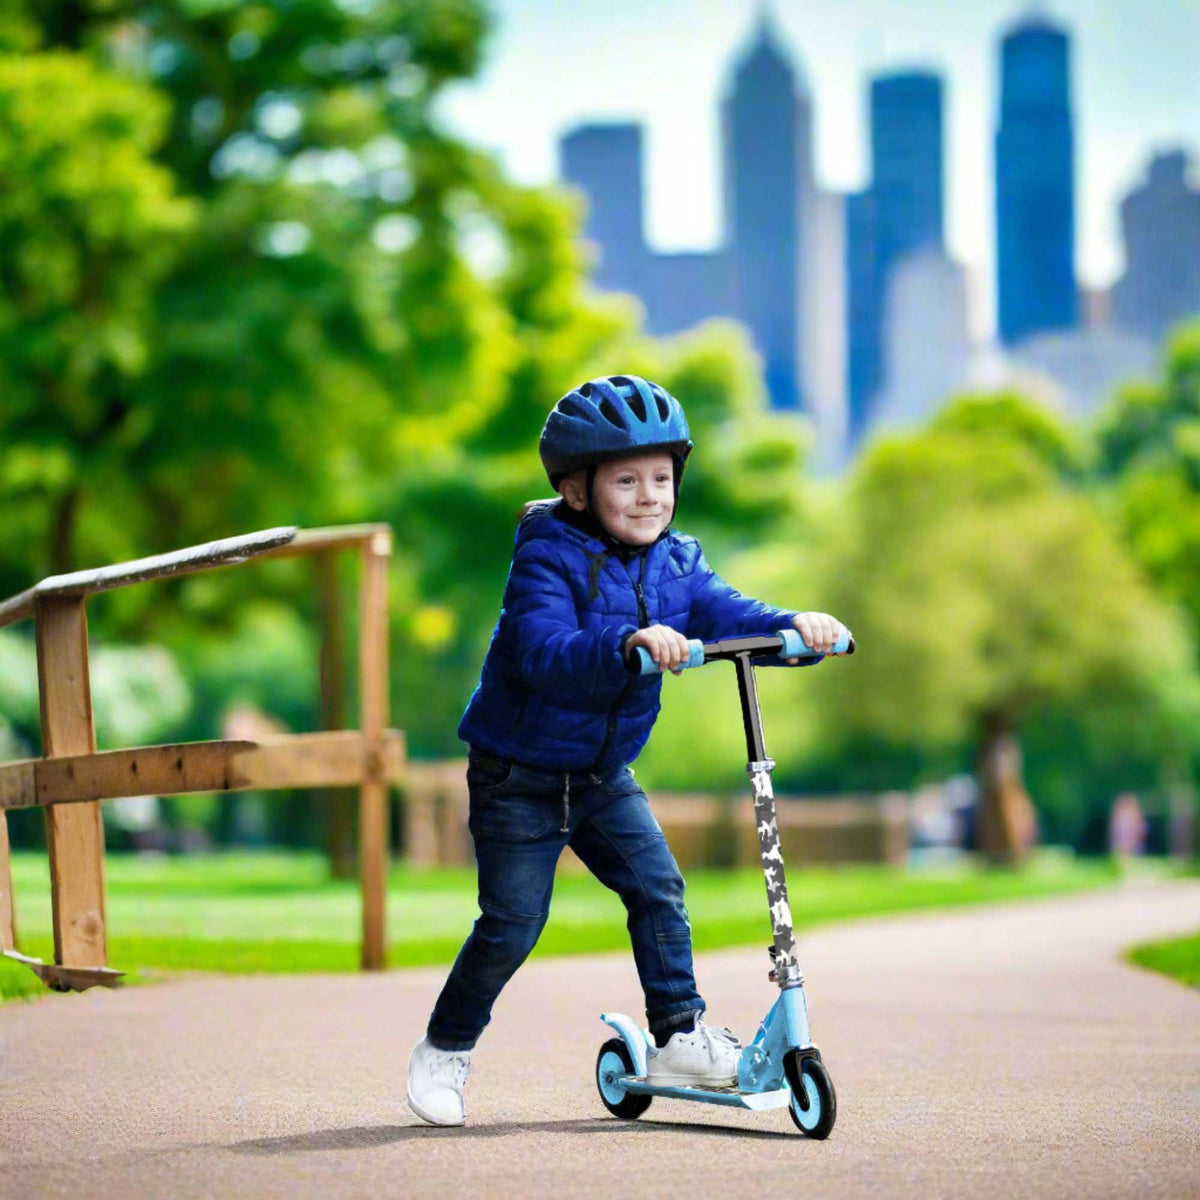 EVO Children&#39;s Inline Scooter for Kids Ages 5 and Up with Adjustable Handlebar, perfect for enhancing motor skills and outdoor fun.